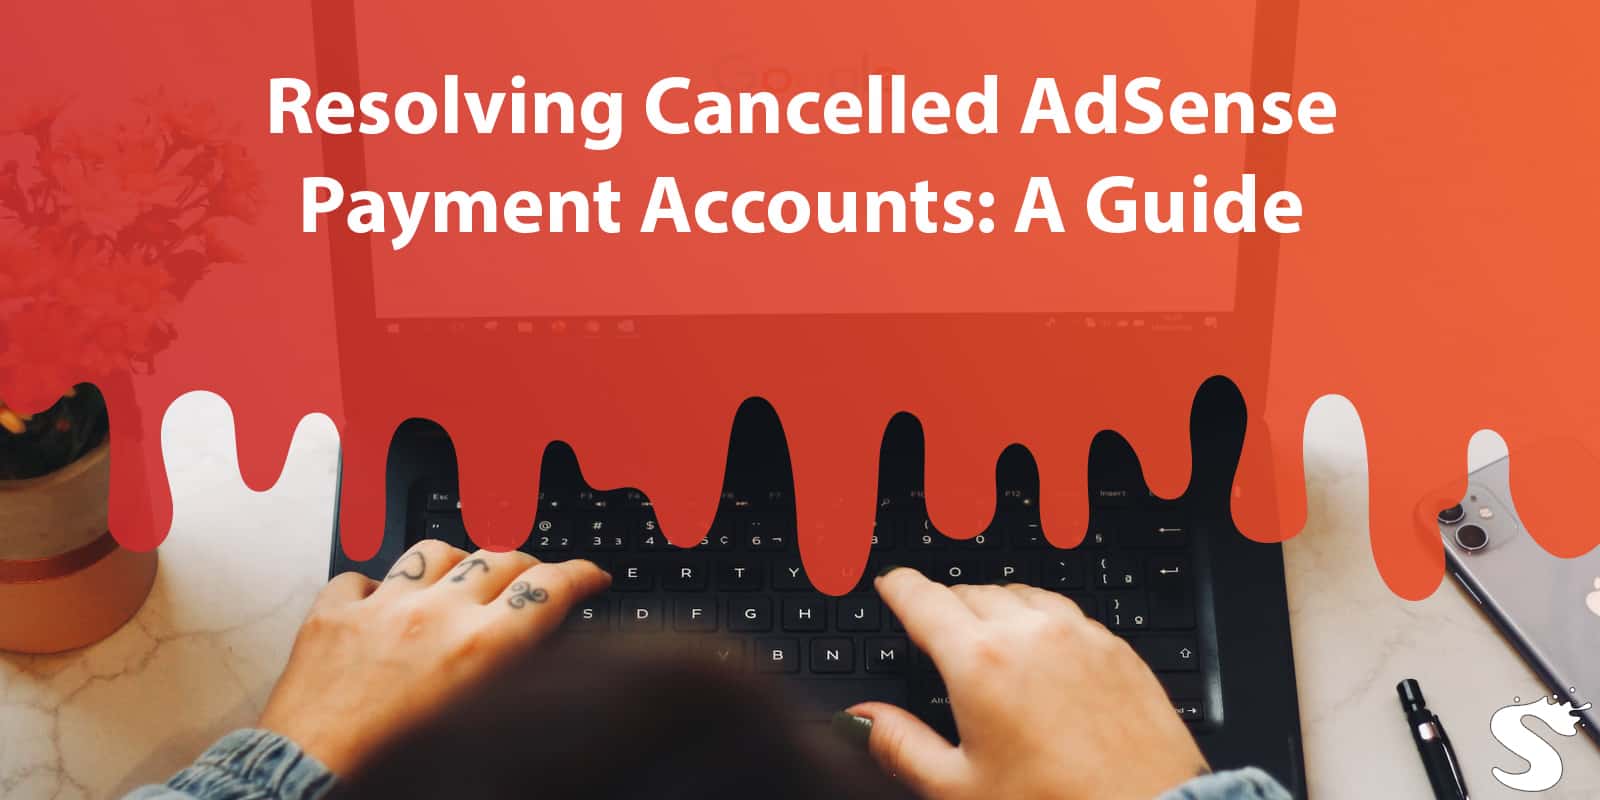 Resolving Cancelled AdSense Payment Accounts: A Guide